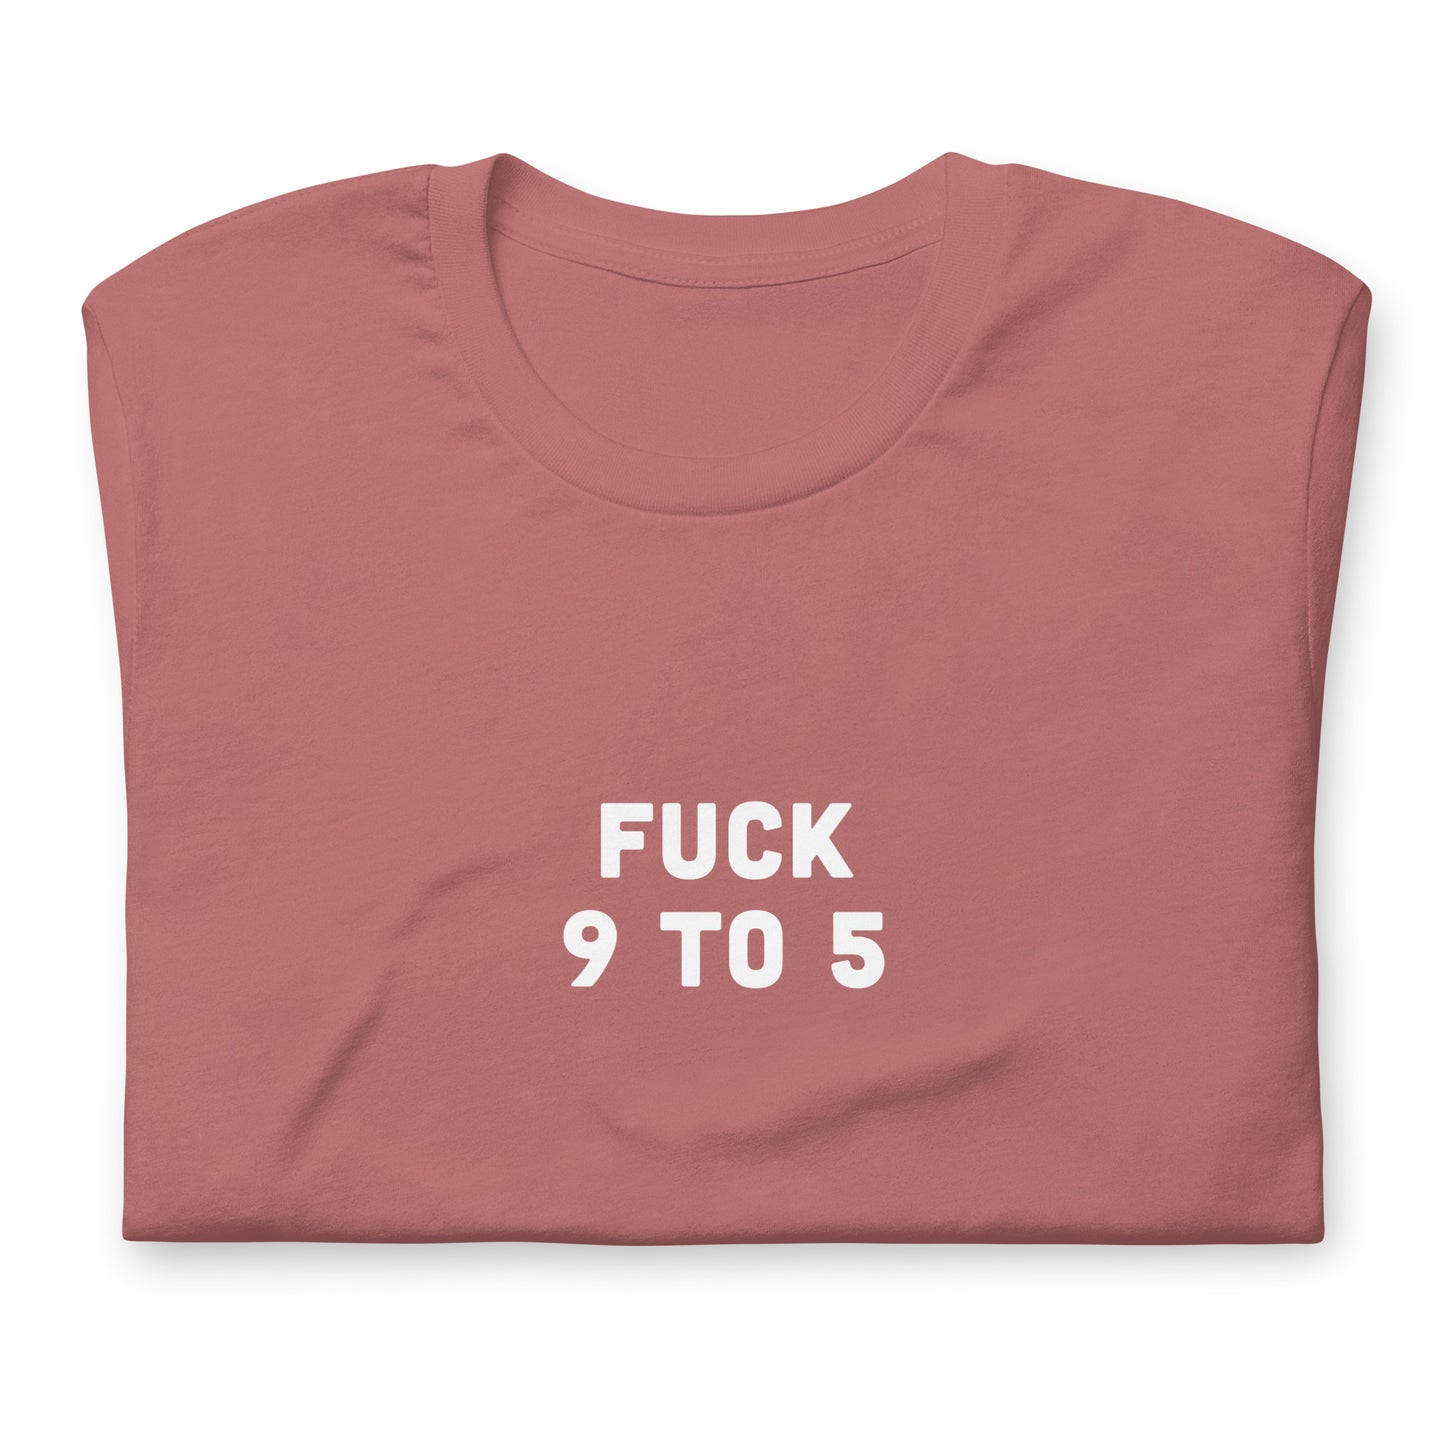 Fuck 9 To 5 T-Shirt Size XL Color Navy